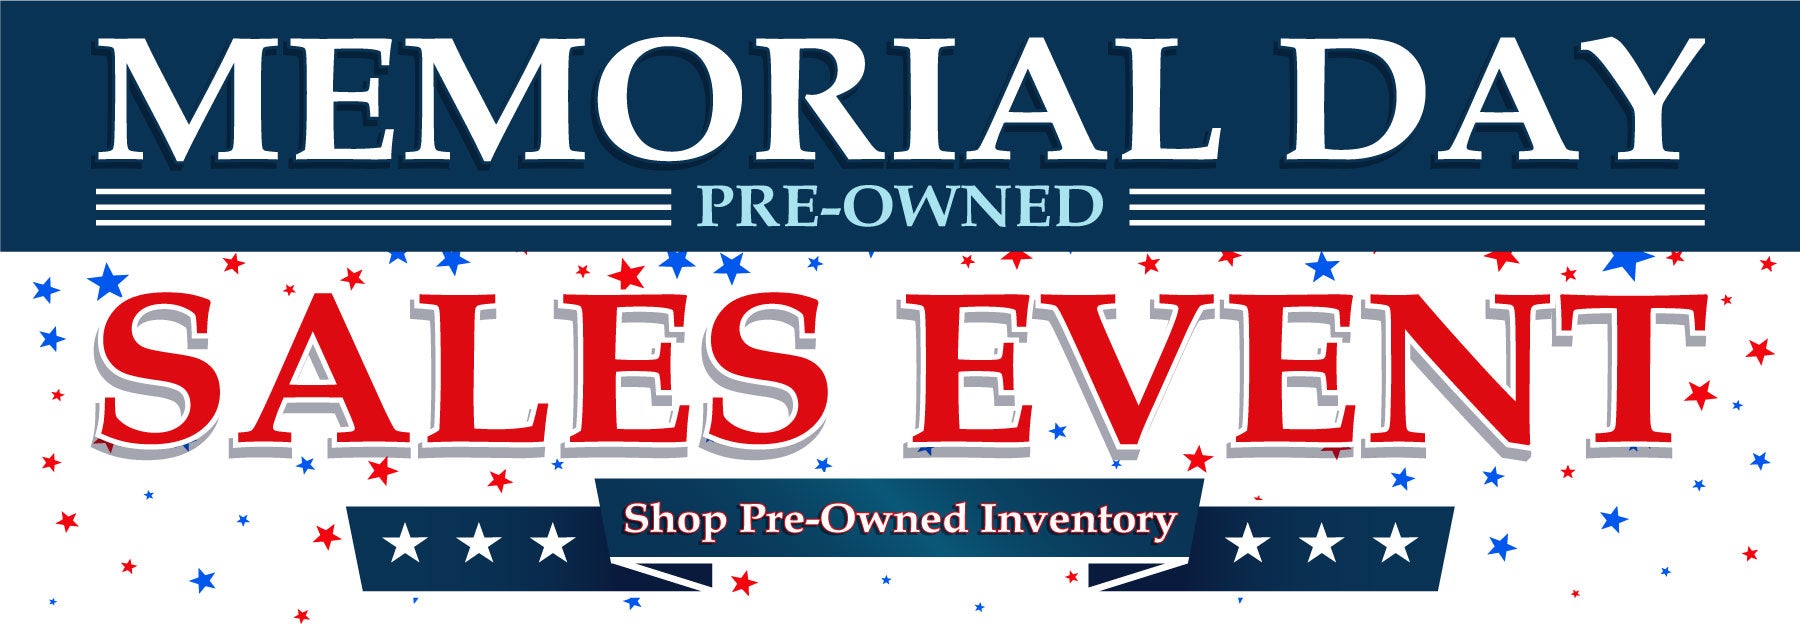 Memorial Day Pre-Owned Sales Event